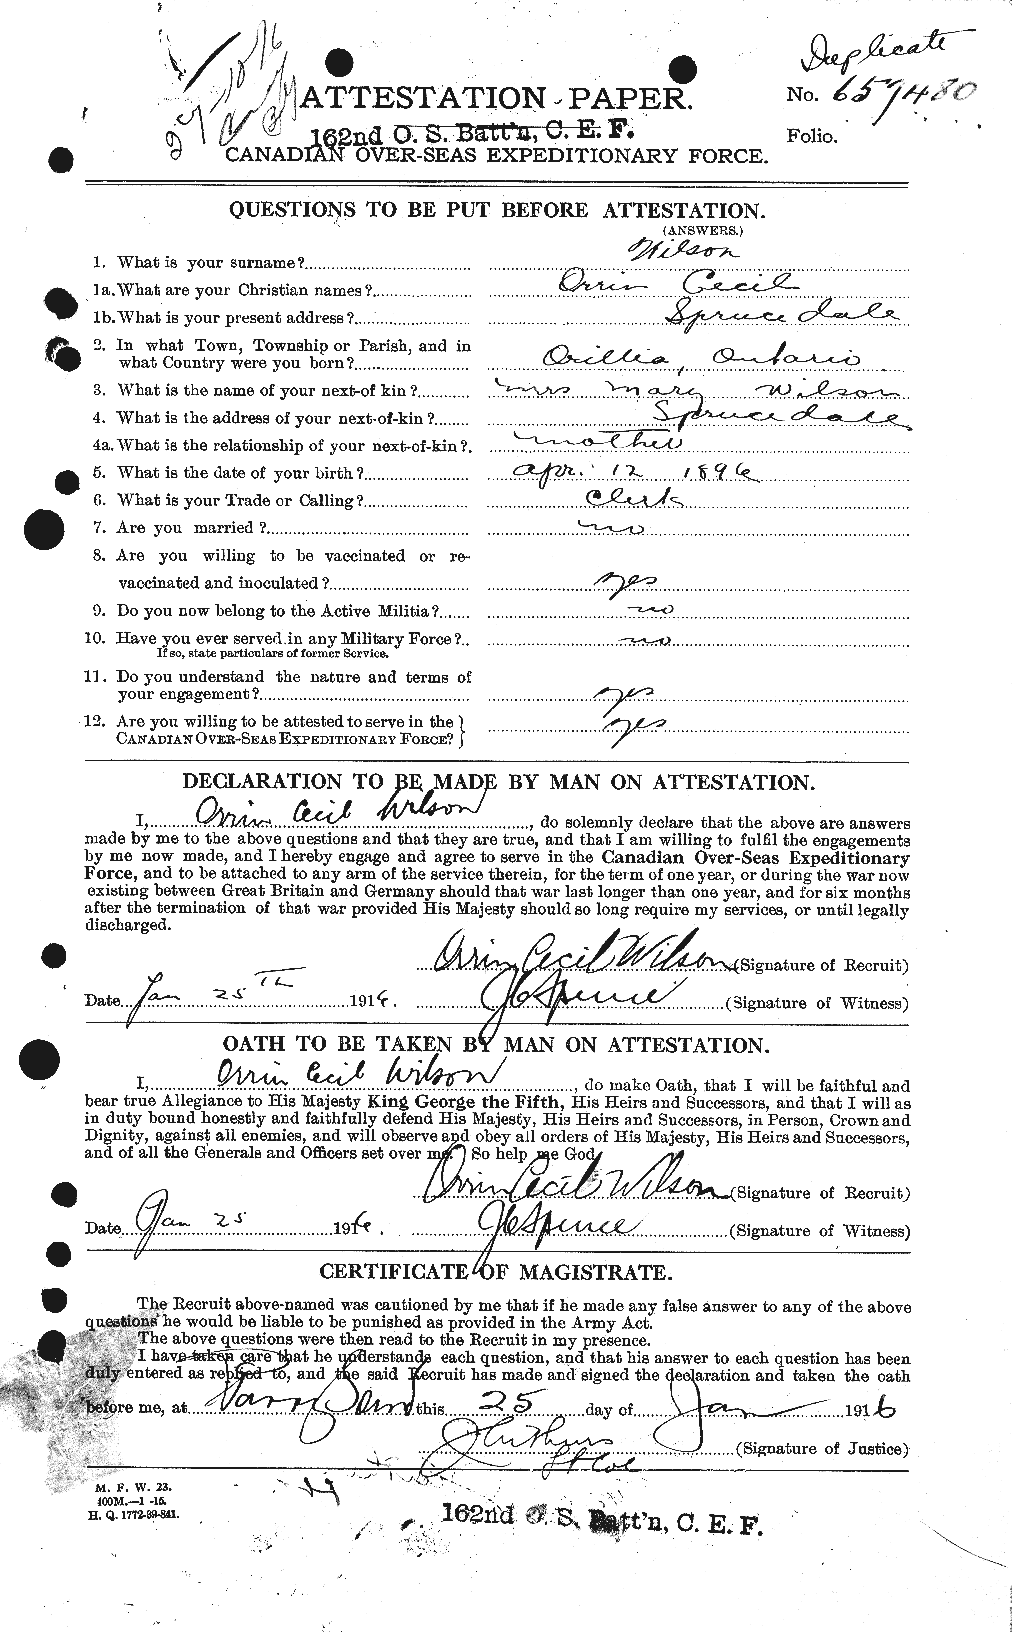 Personnel Records of the First World War - CEF 678753a